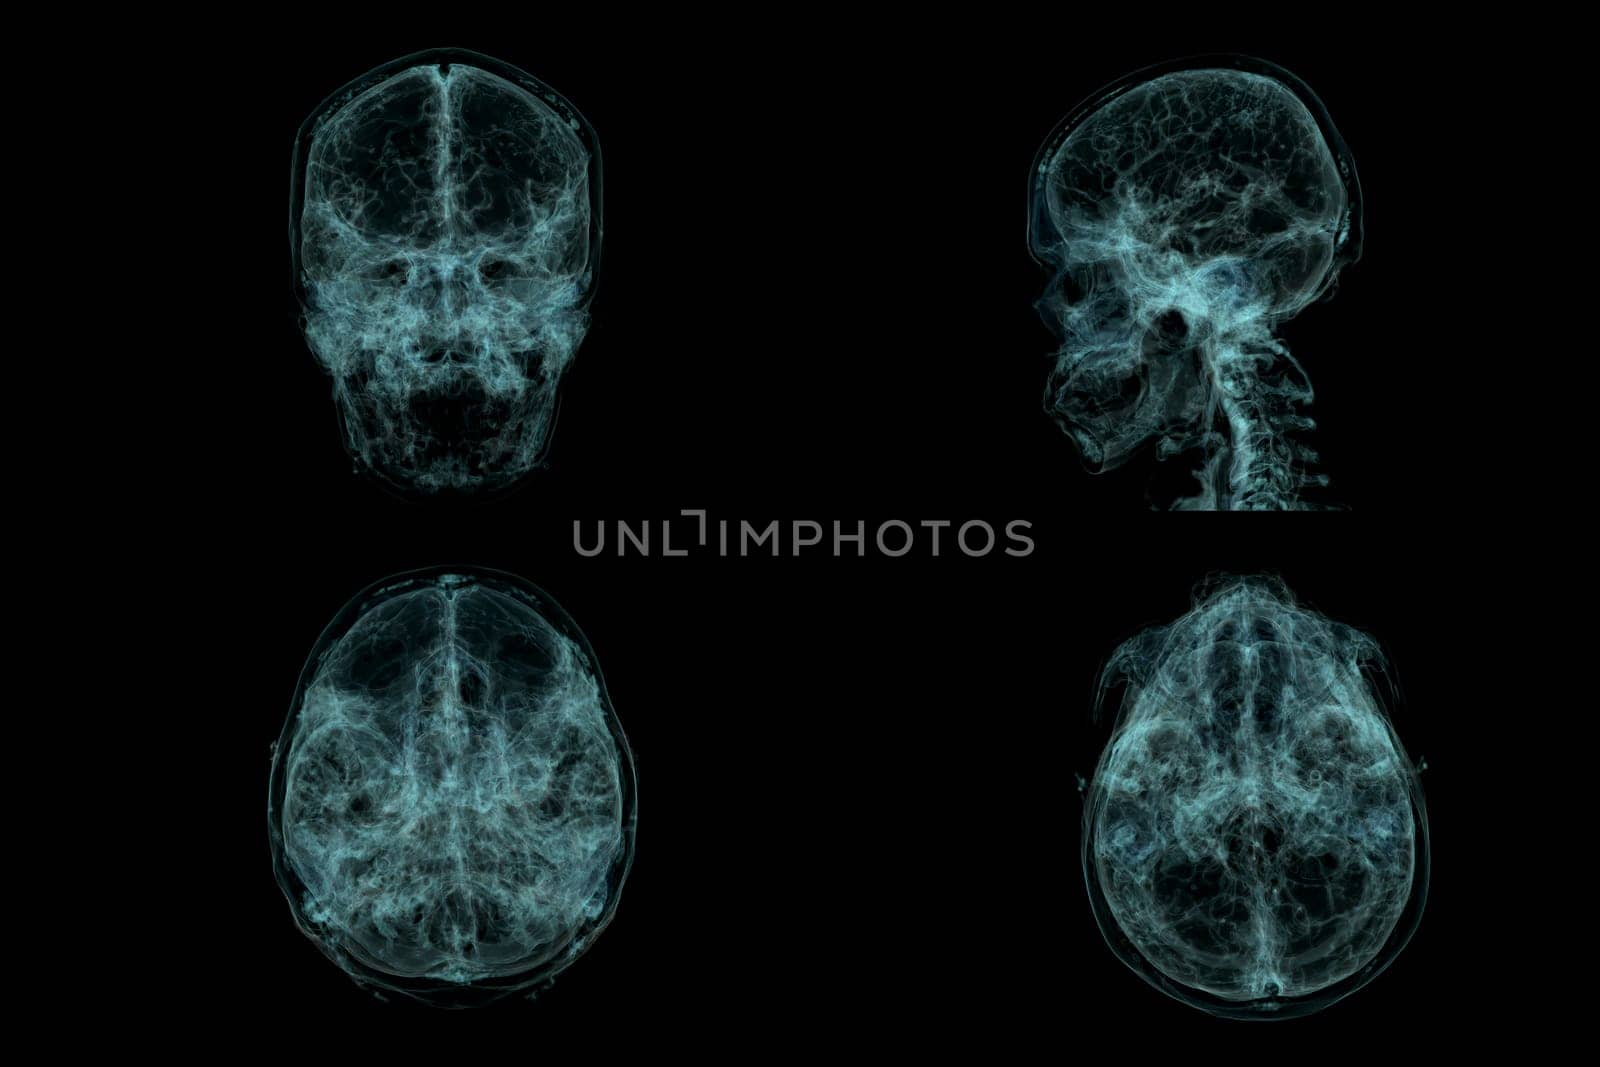 Collection of Human Skull, Brain by CT Scan. X-ray Visualization Inside Of Skull. 3D Illustration Render.